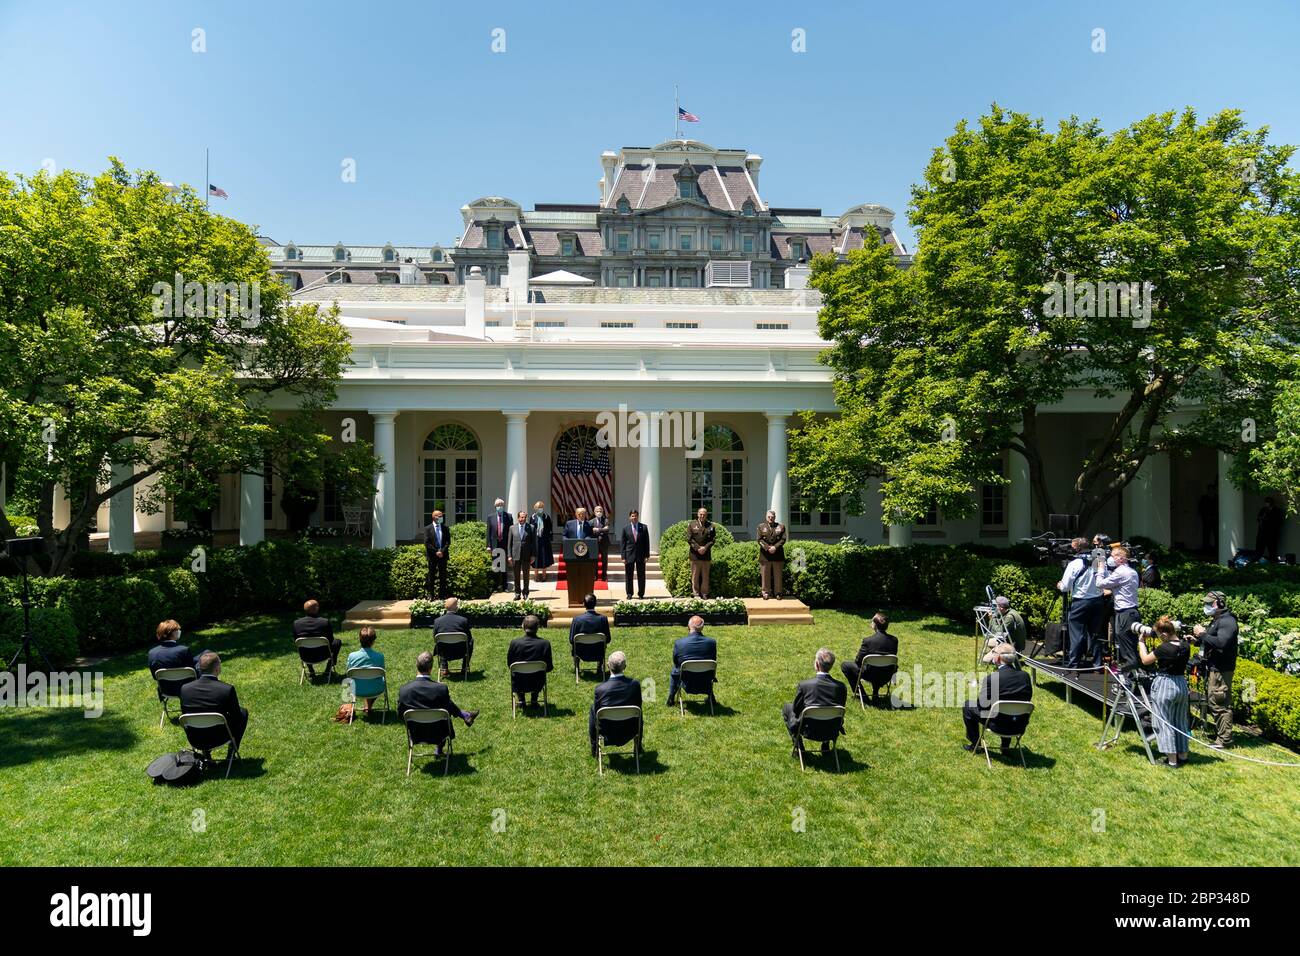 U.S. President Donald Trump, discusses COVID-19 vaccine development in the Rose Garden of the White House May 15, 2020 in Washington, D.C. Stock Photo